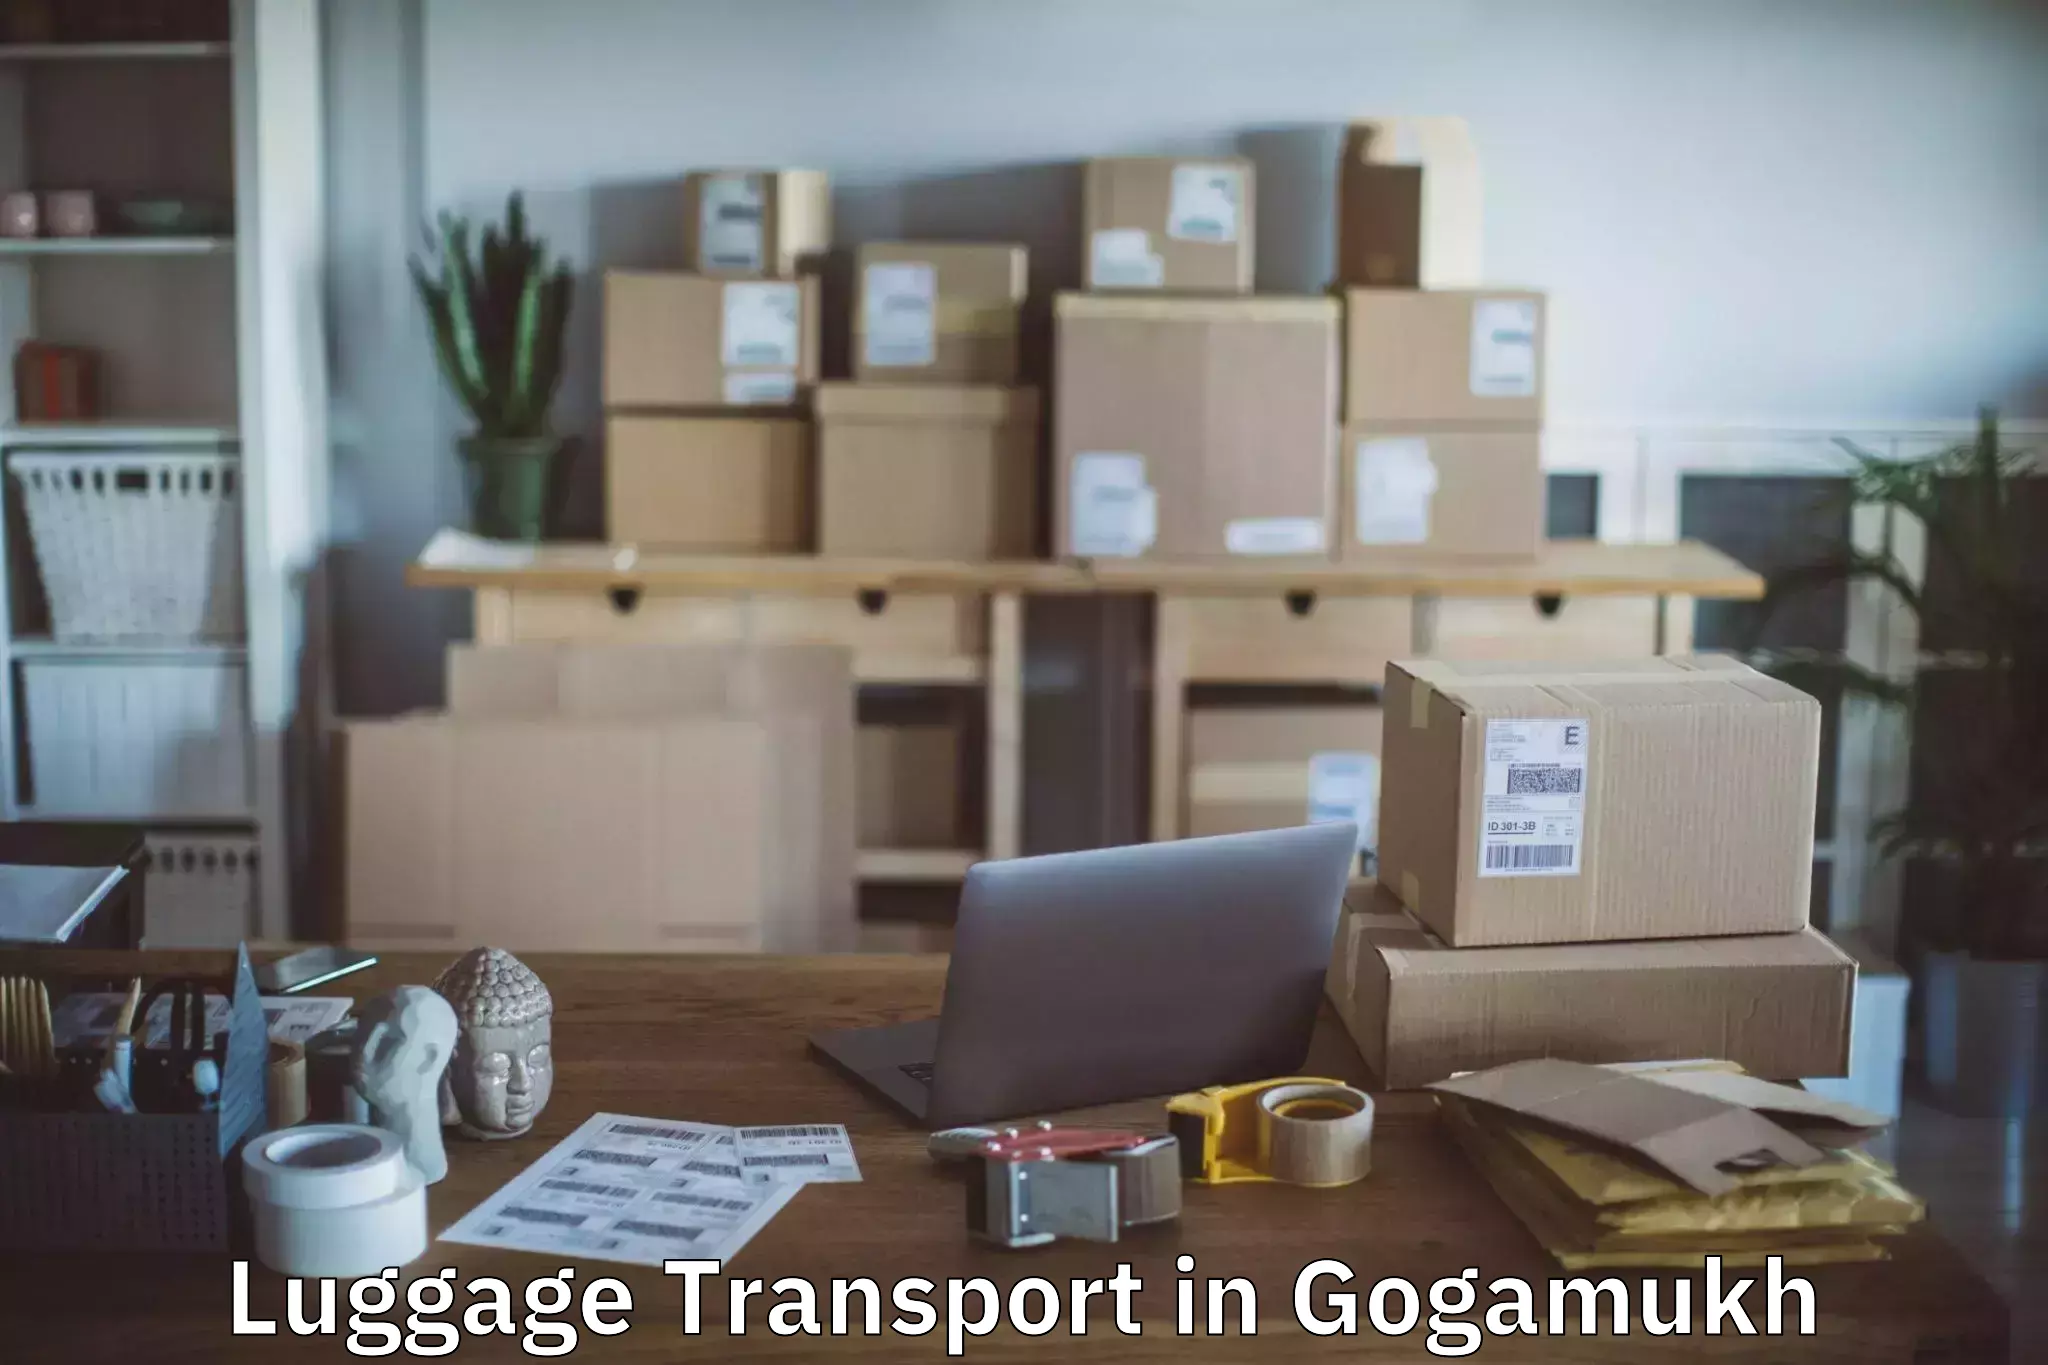 Baggage delivery scheduling in Gogamukh